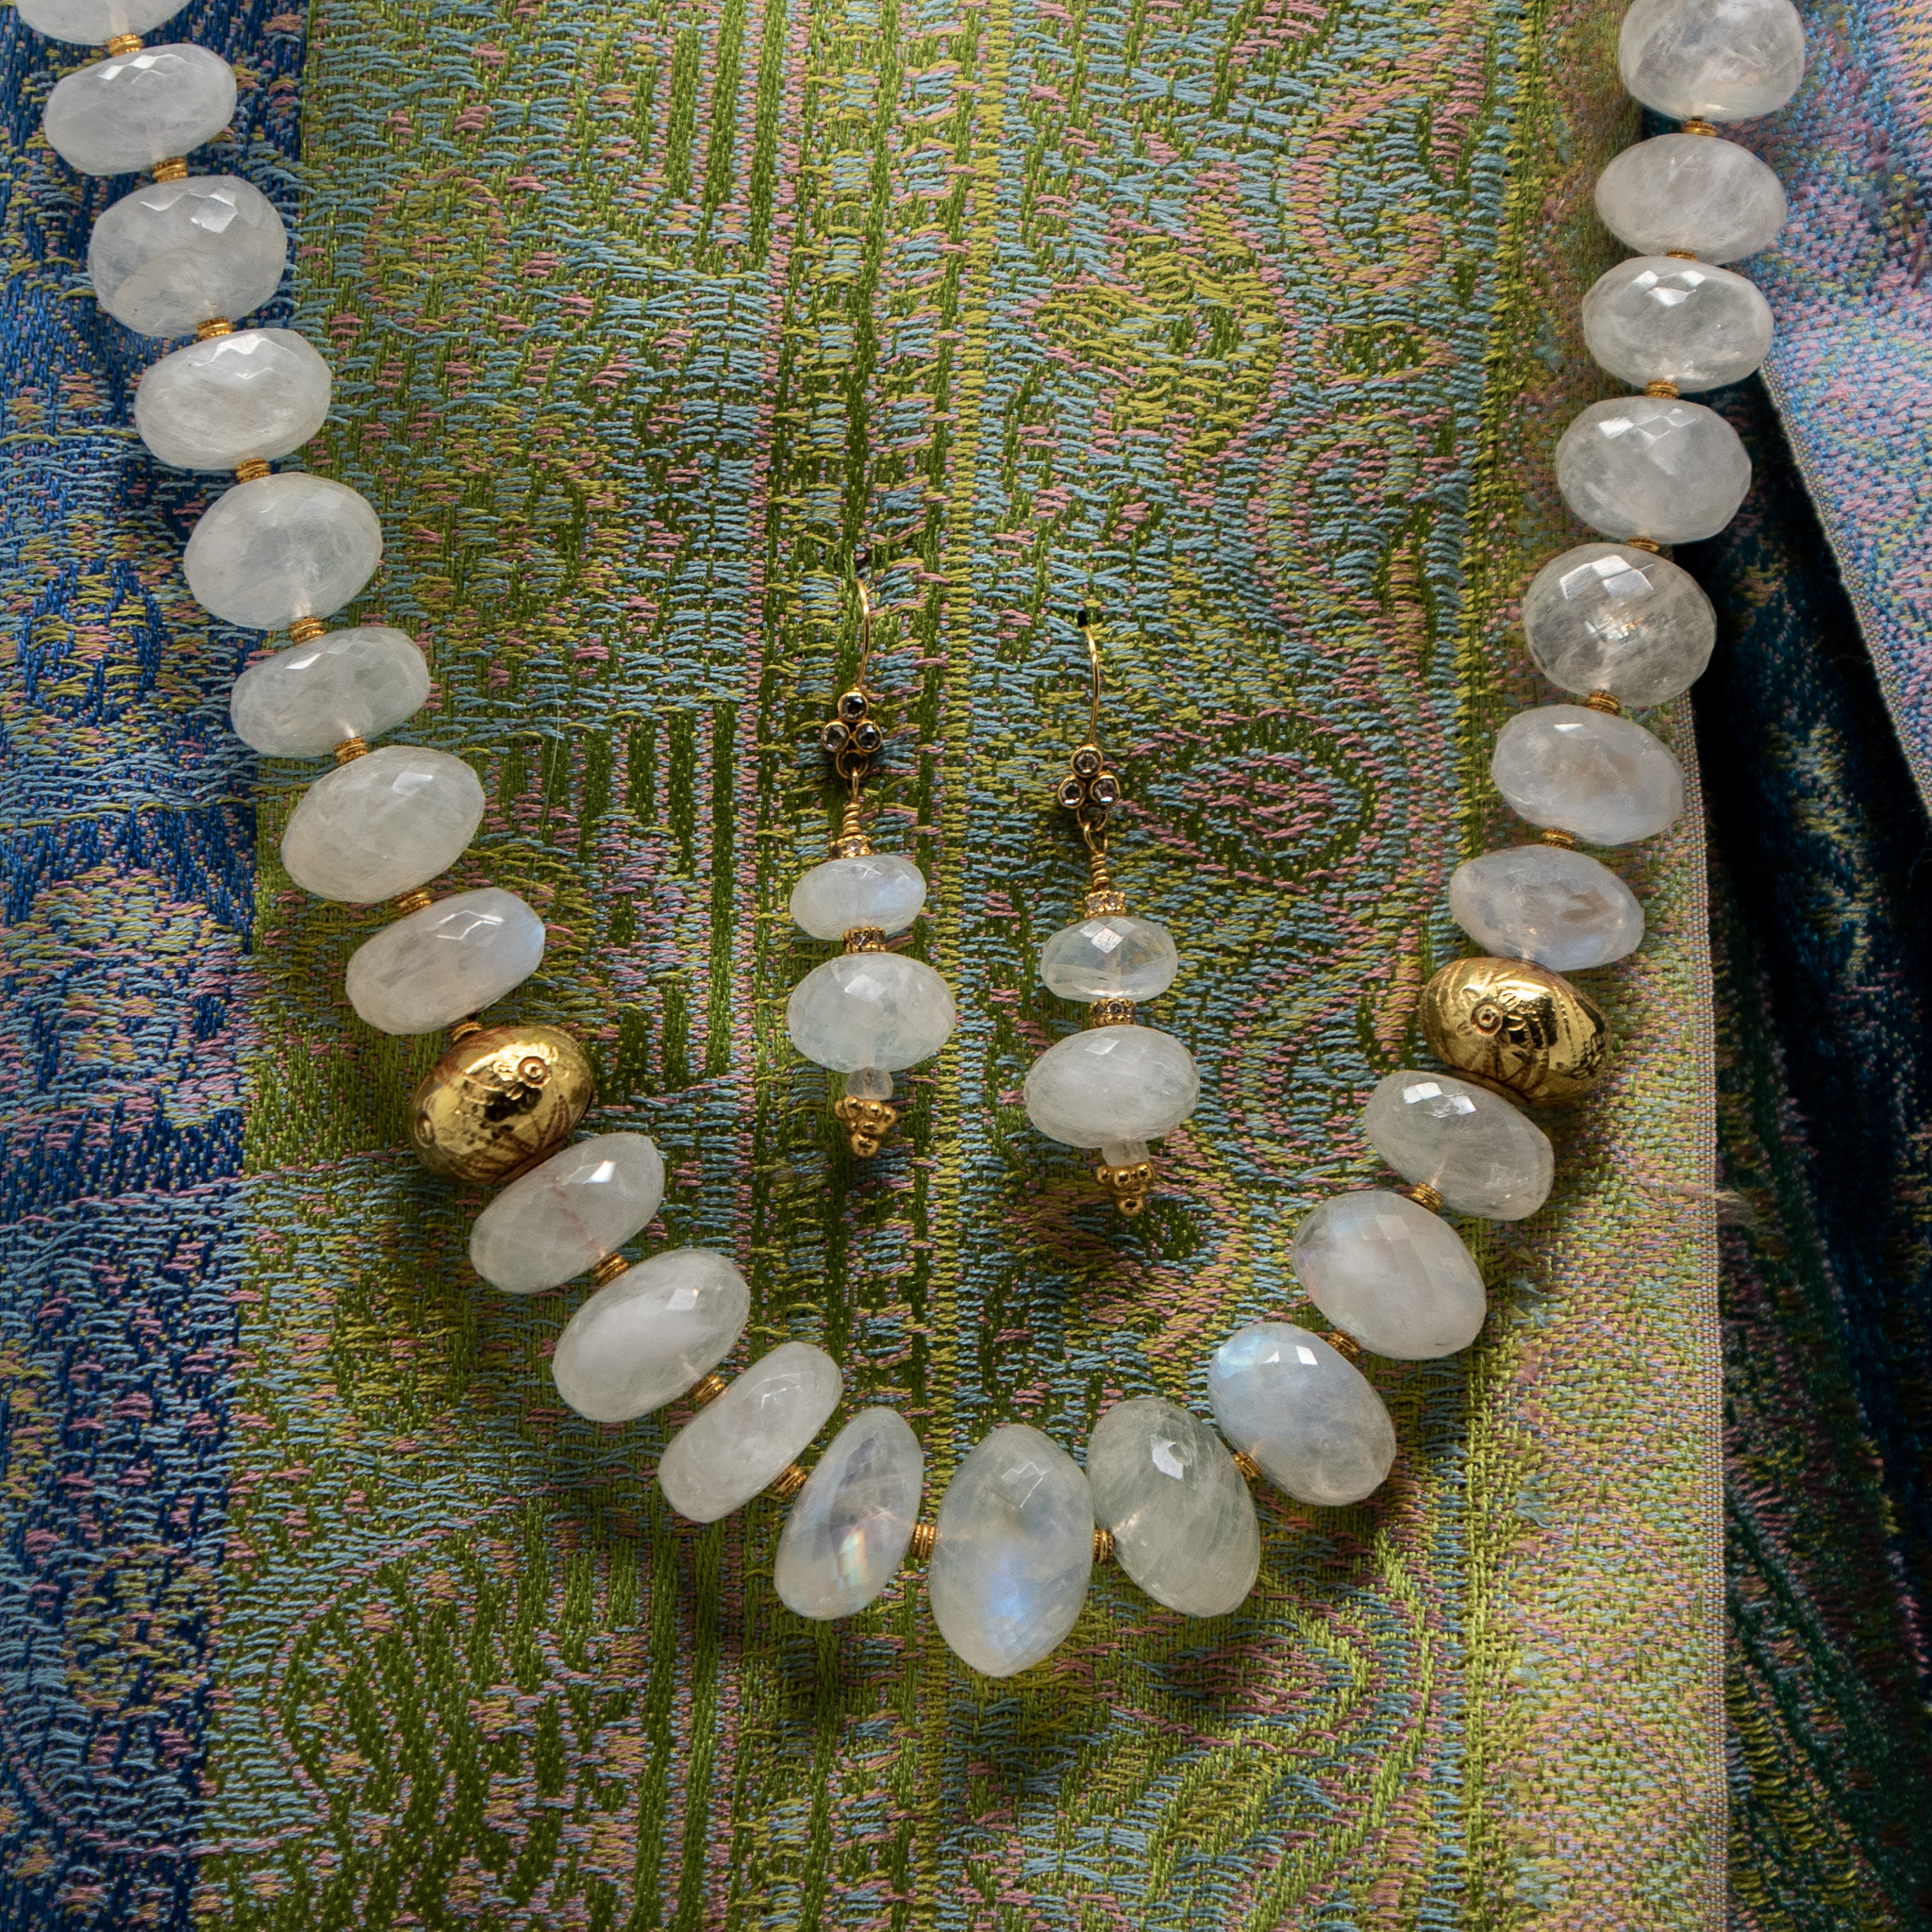 Moonstone necklace with matching earrings